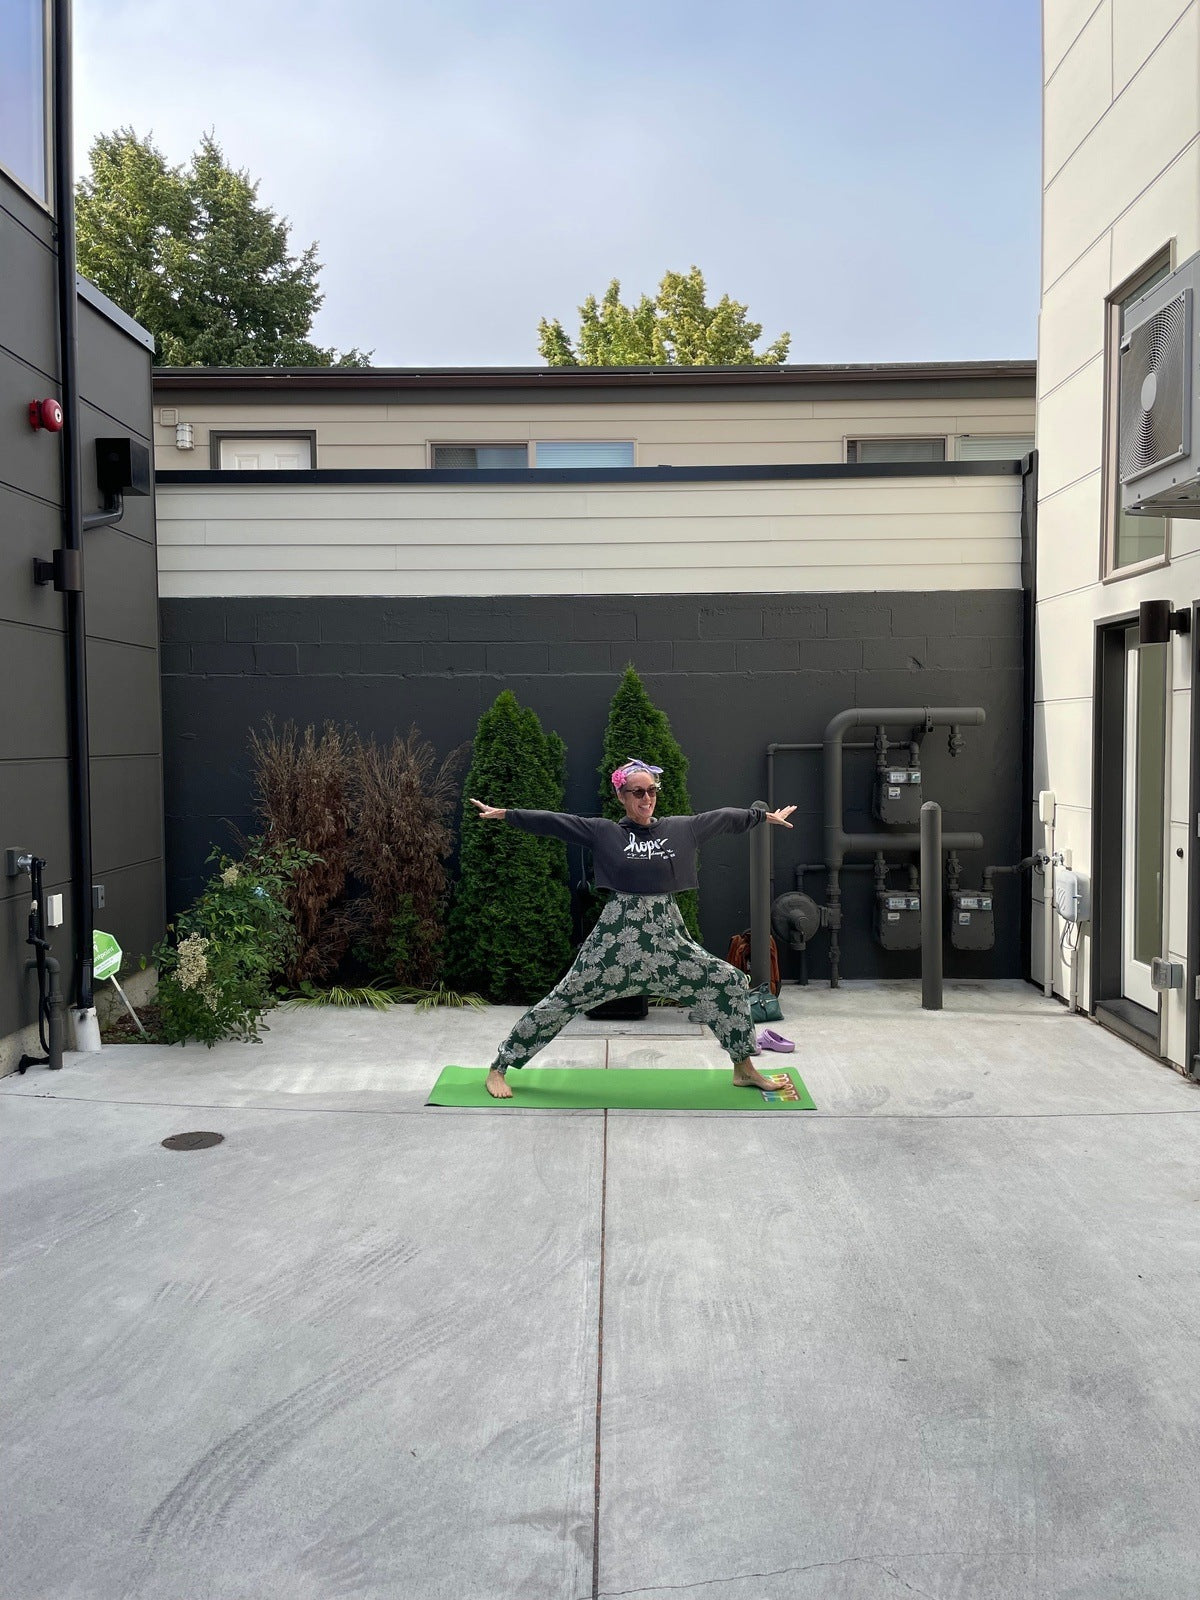 July 13 Saturday Yoga  with Tracy